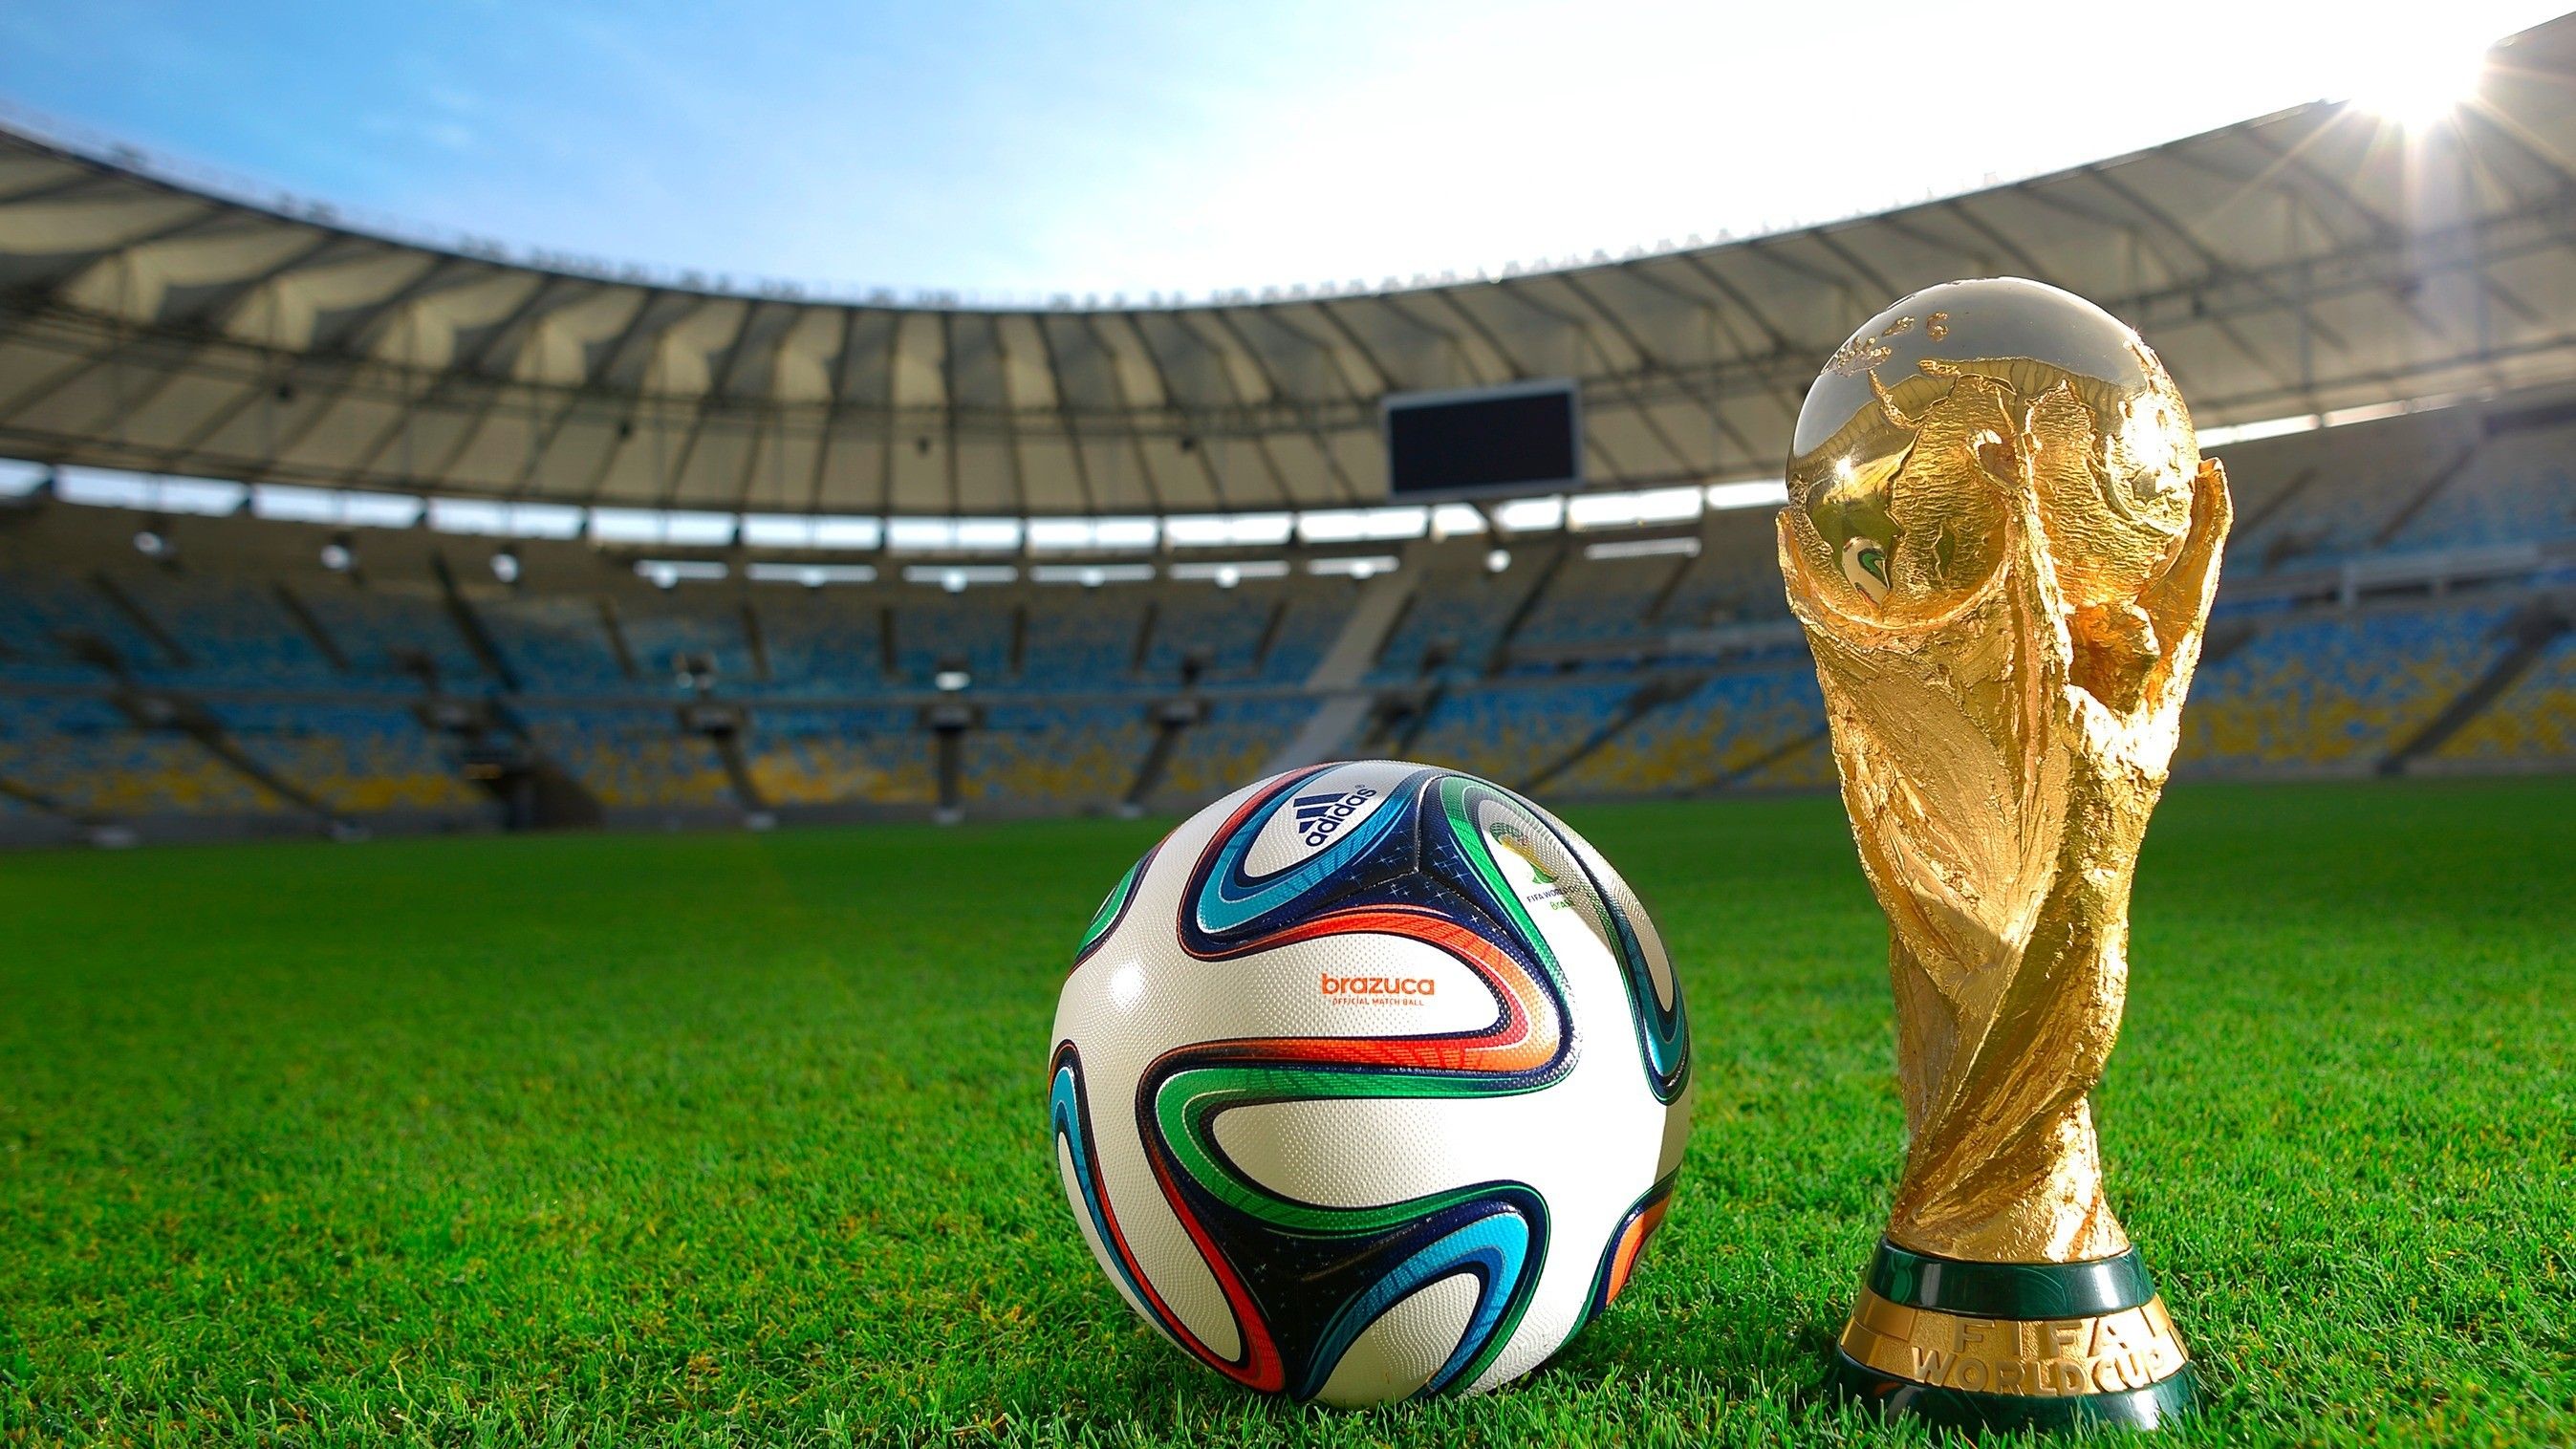 World Cup 2014 Pics, High Definition, High Quality, Widescreen